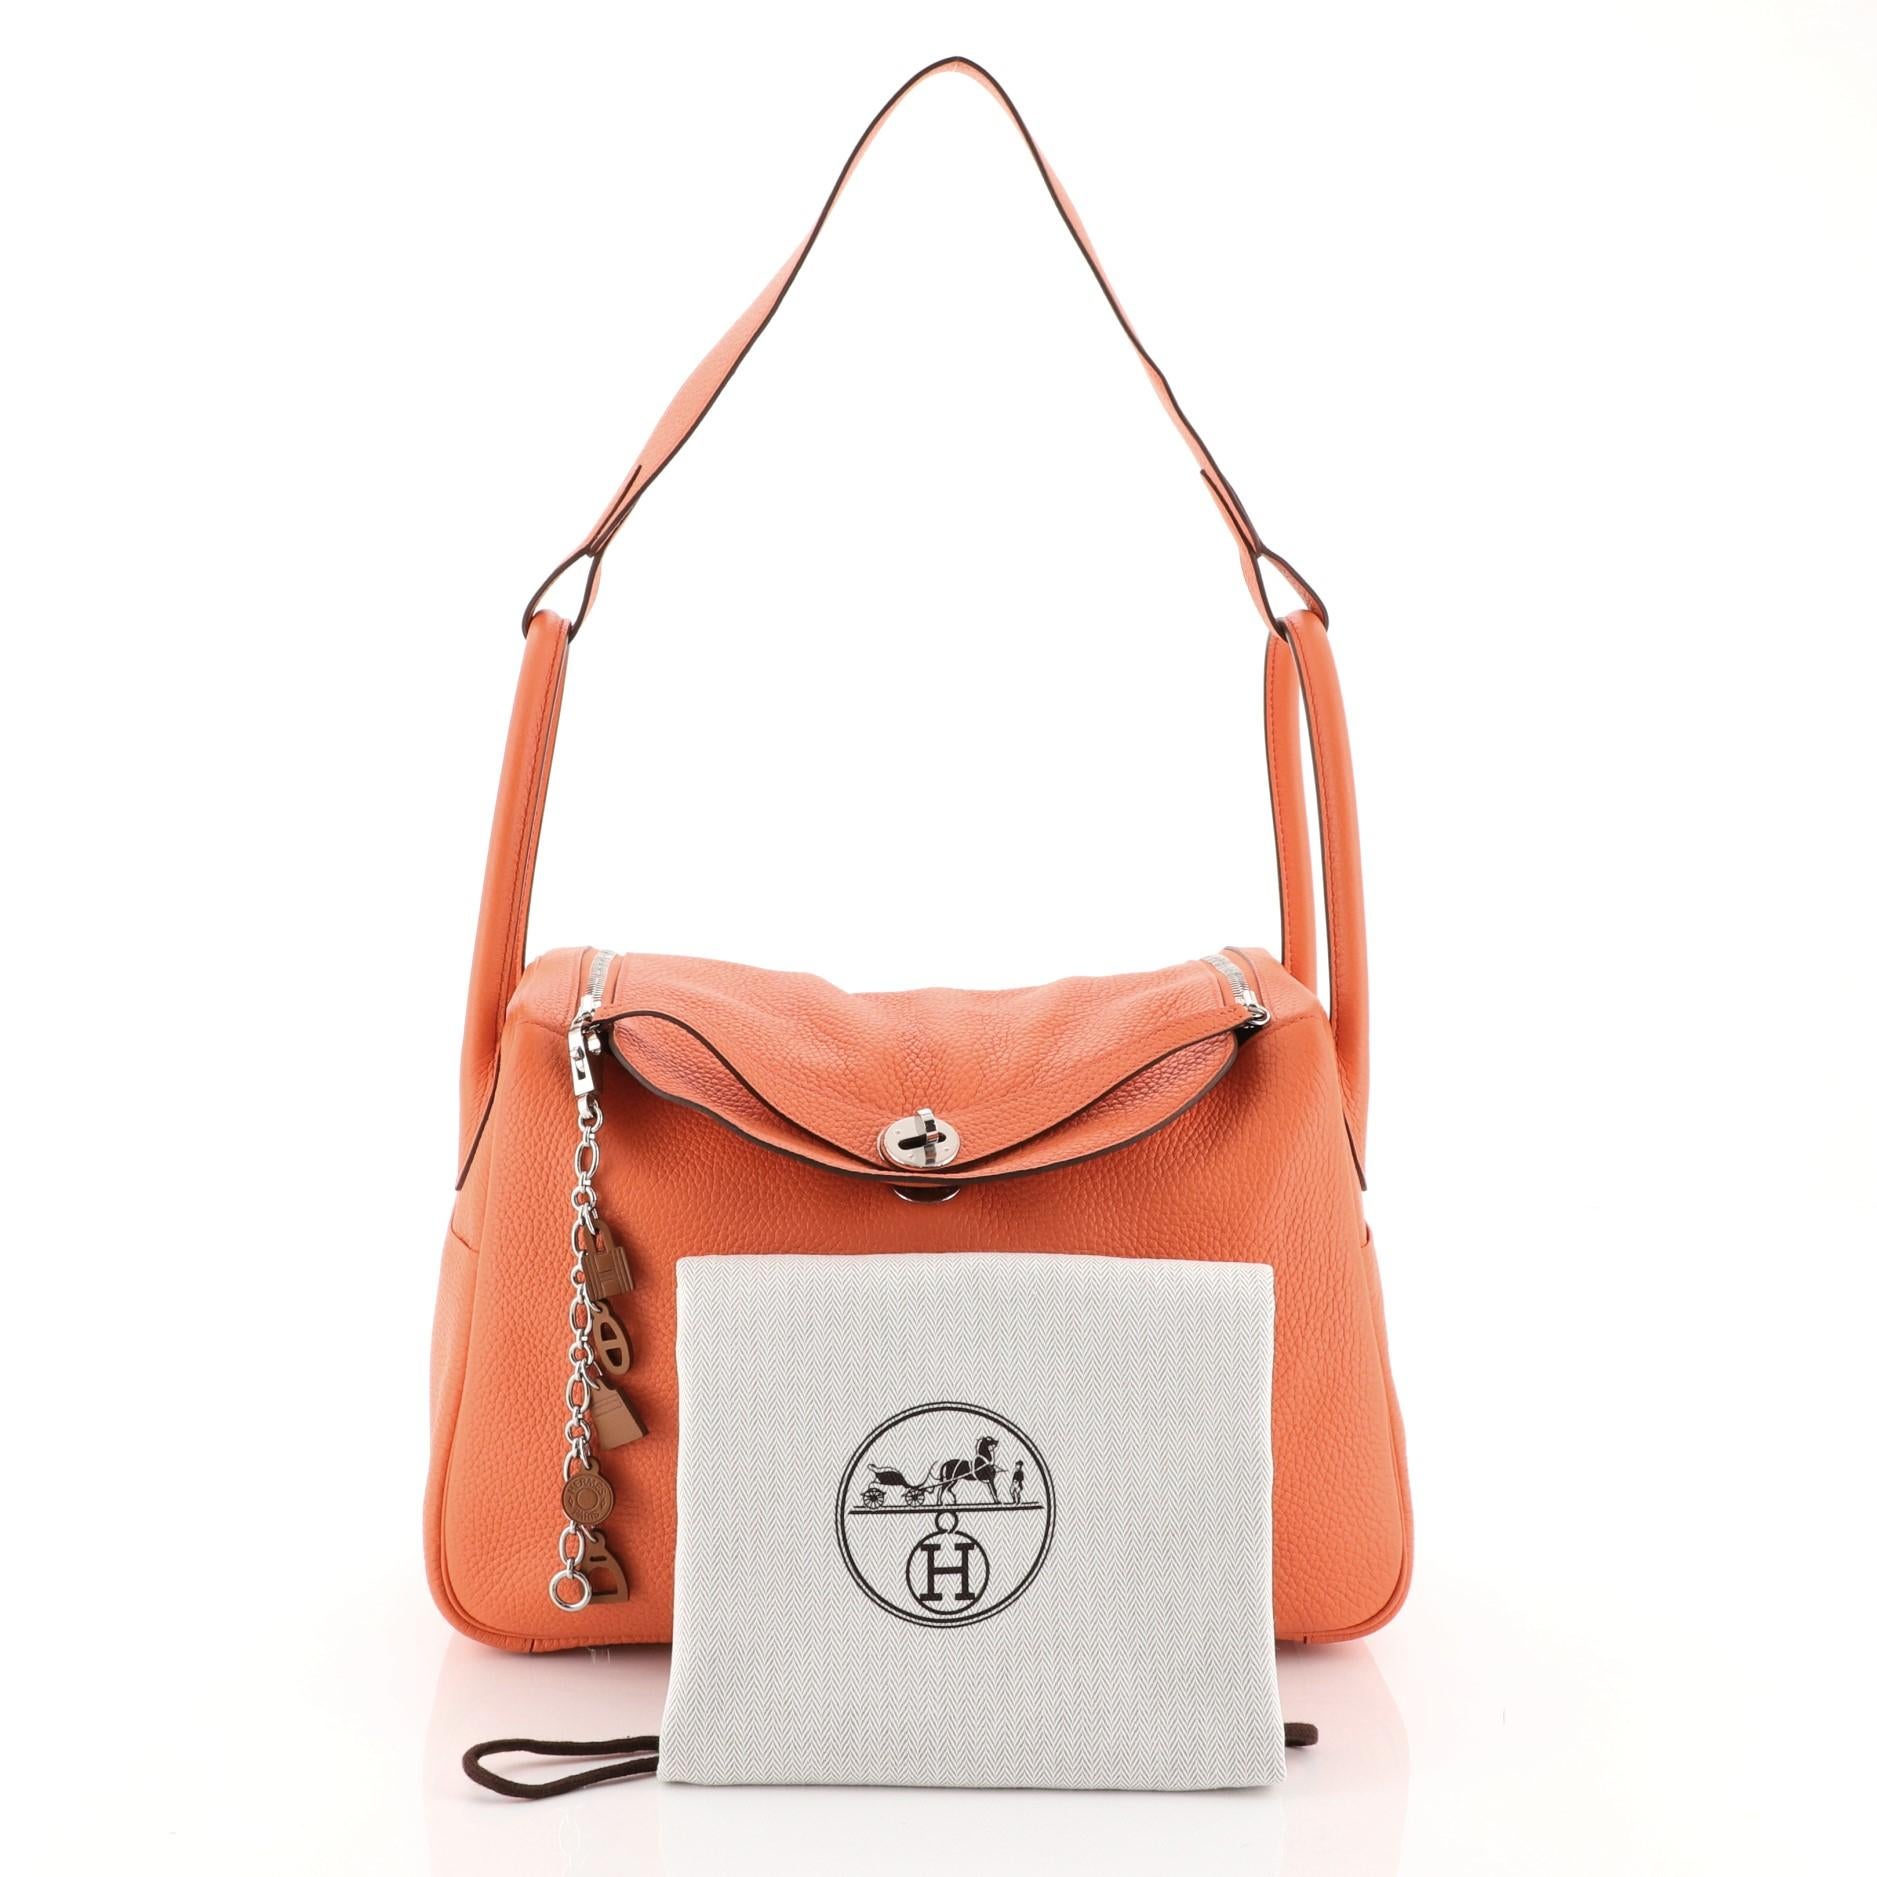 This Hermes Lindy Handbag Clemence 34, crafted from Orange Poppy orange Clemence leather, features dual rolled handles with a connecting long strap, two side slip pockets, protective base studs, and palladium hardware. Its double zip closure opens